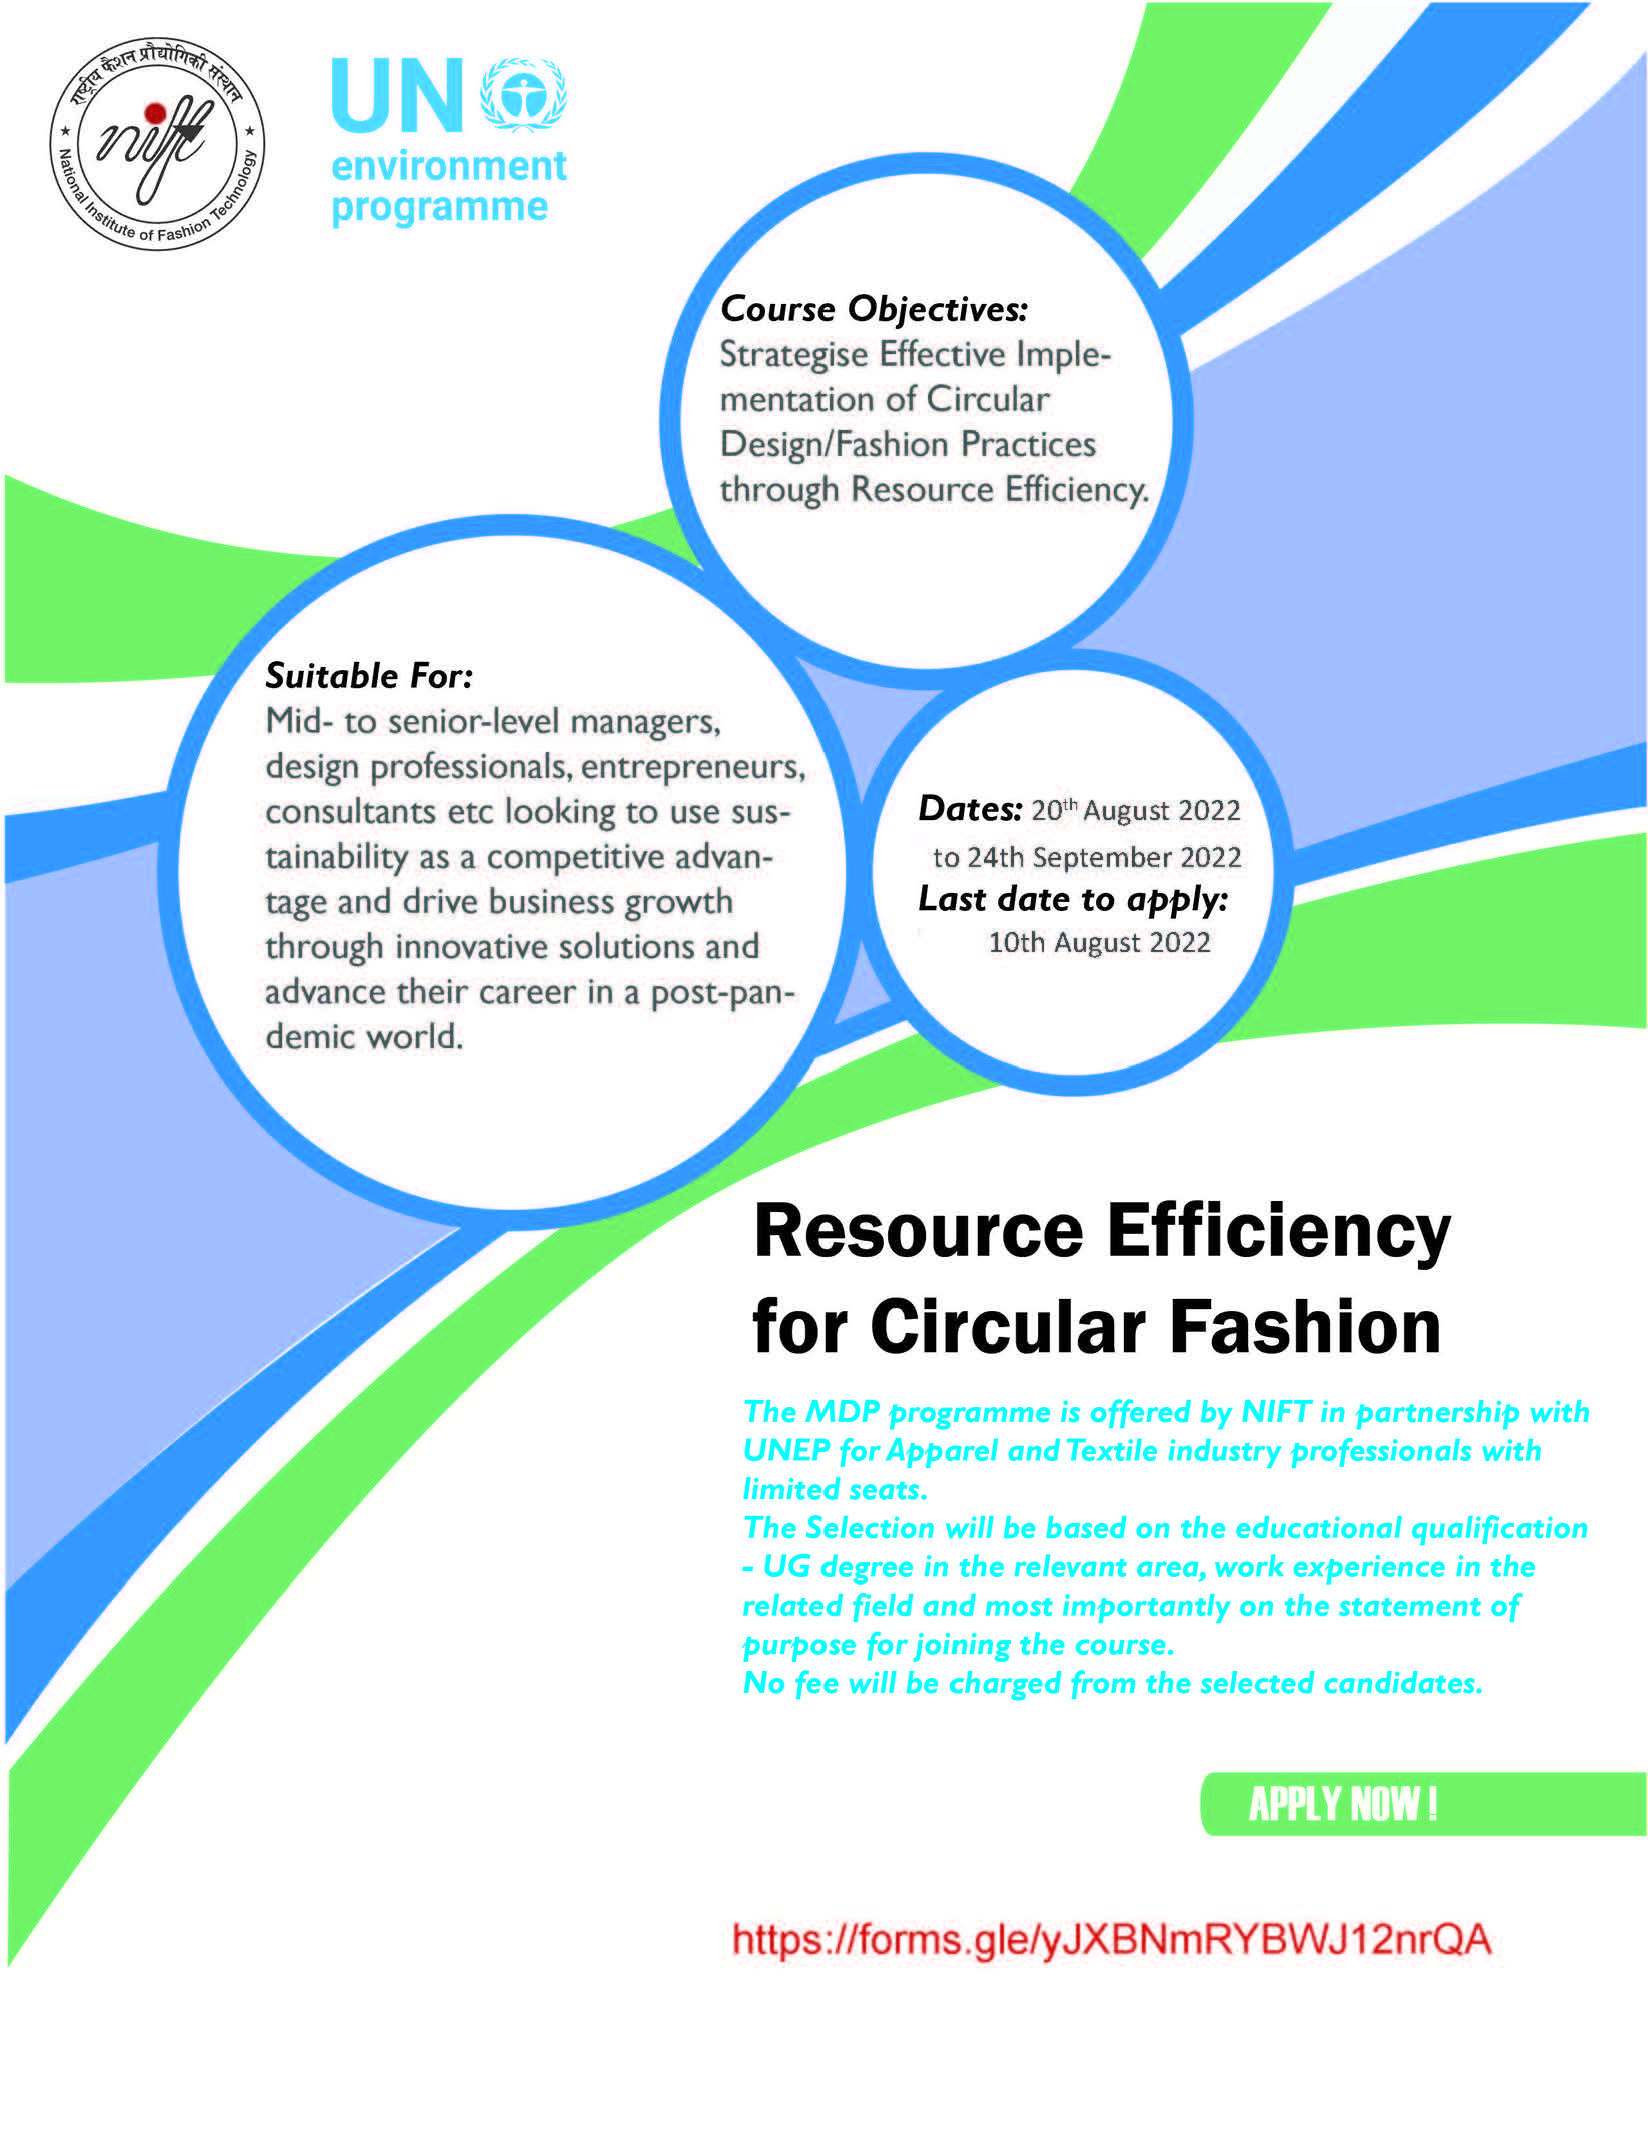 Applications open for MDP- Resource Efficiency for Circular Fashion in collaboration with UNEP